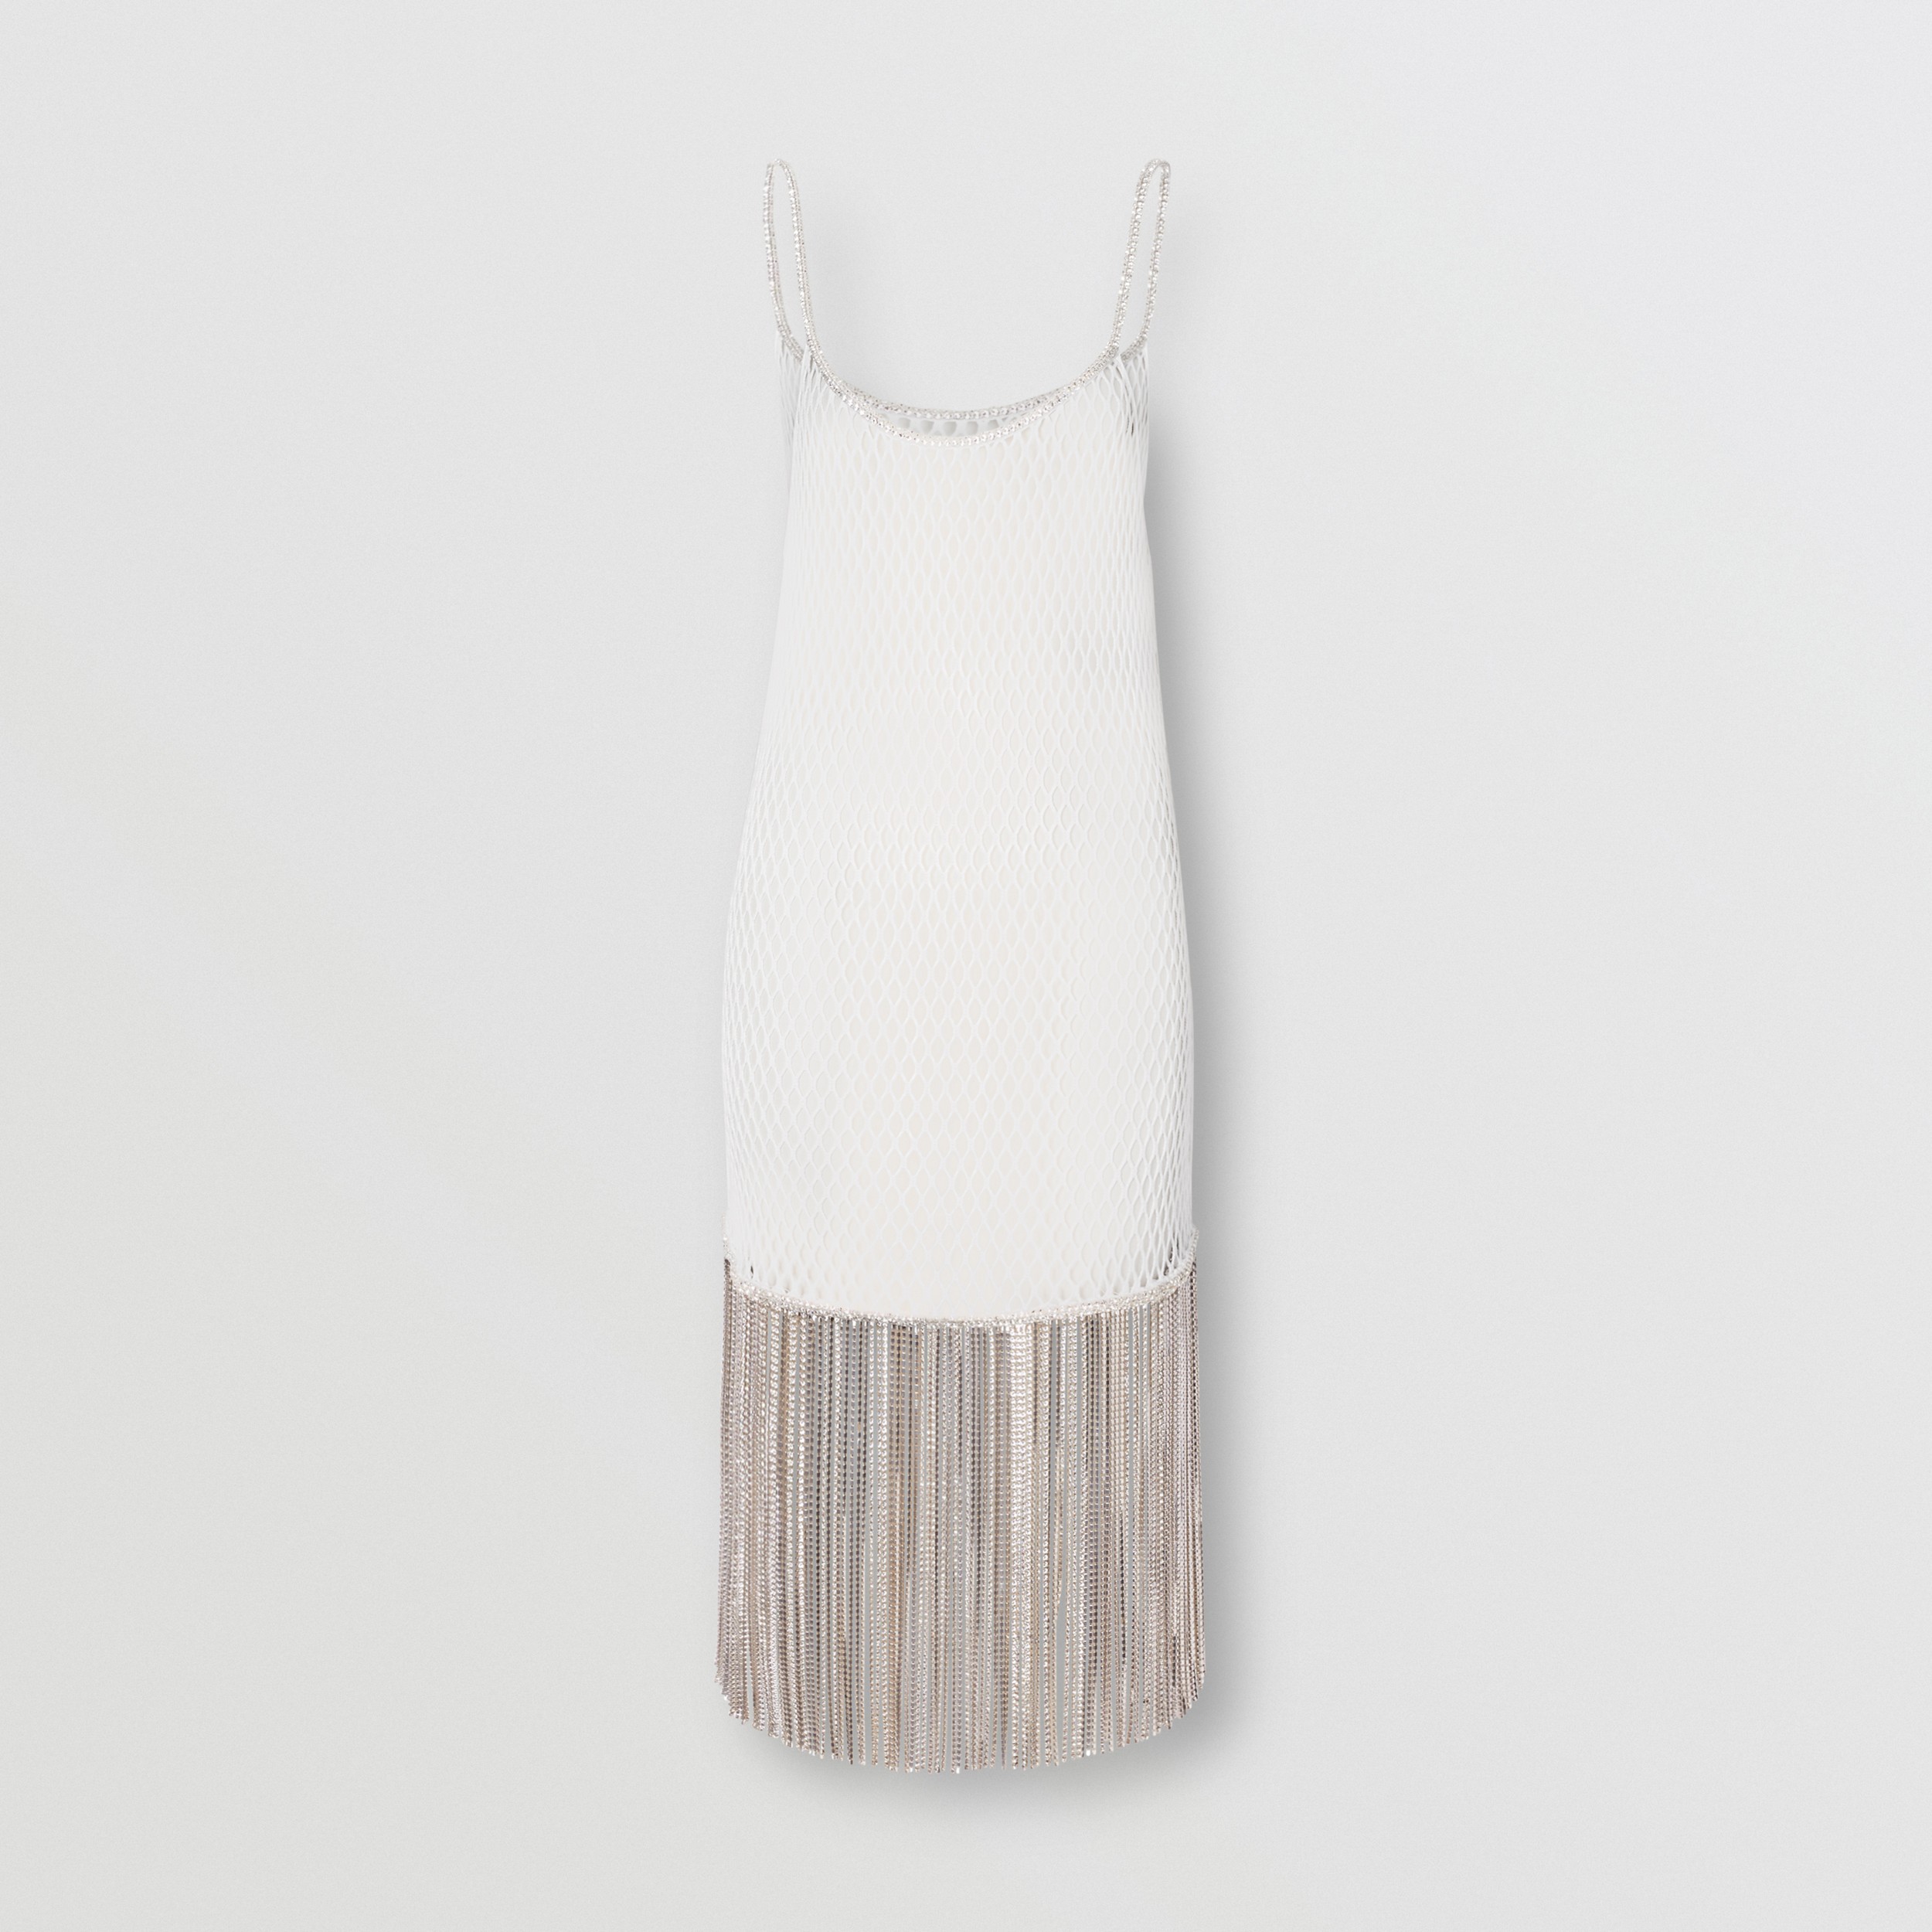 Crystal Fringe Cotton Mesh Dress in White - Women | Burberry United States